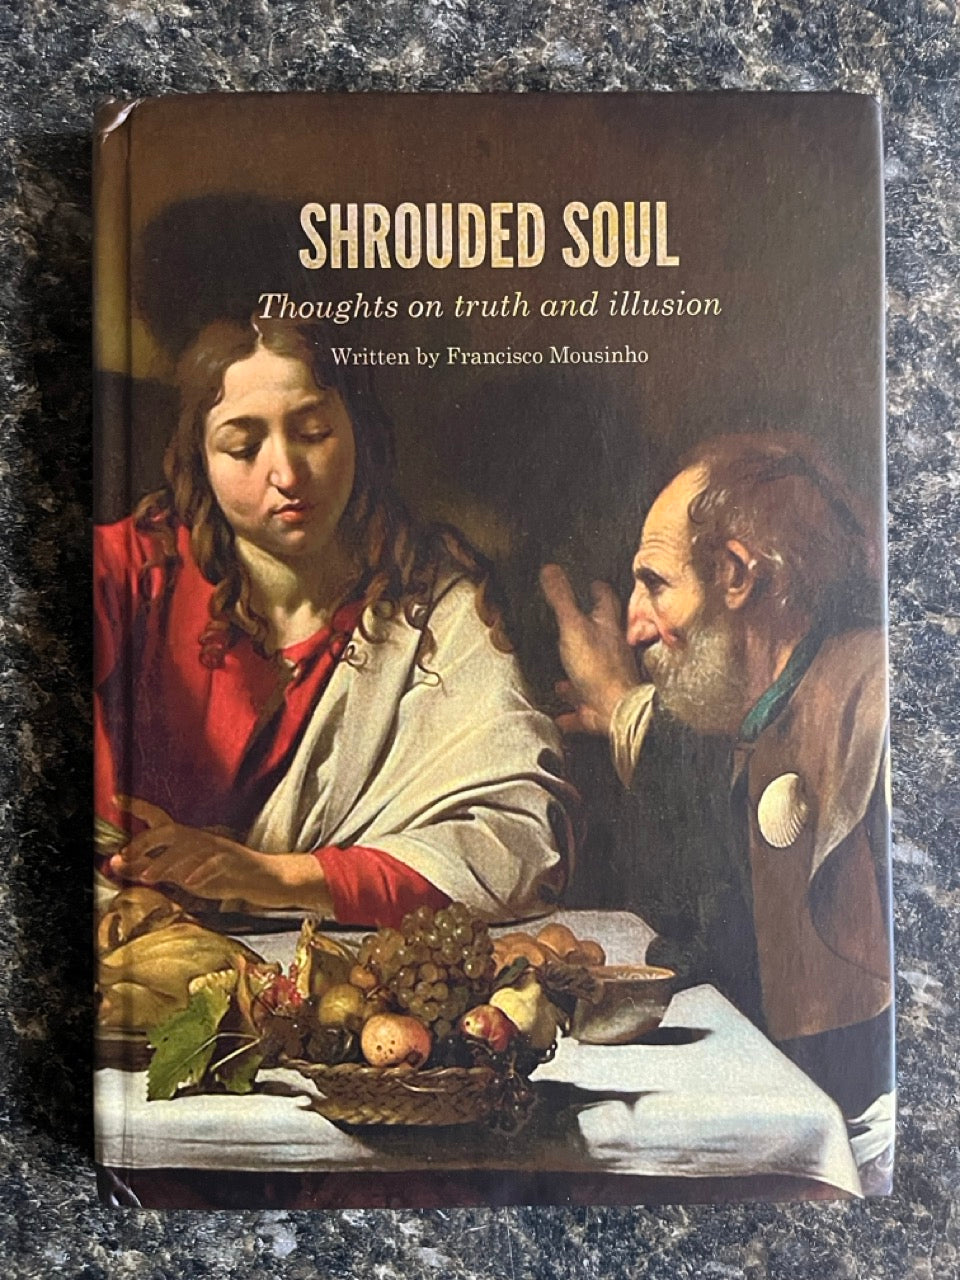 DON'S MAGIC & BOOKS EXCLUSIVE - Shrouded Soul: Thoughts On Truth & Illusion - Francisco Mousinho